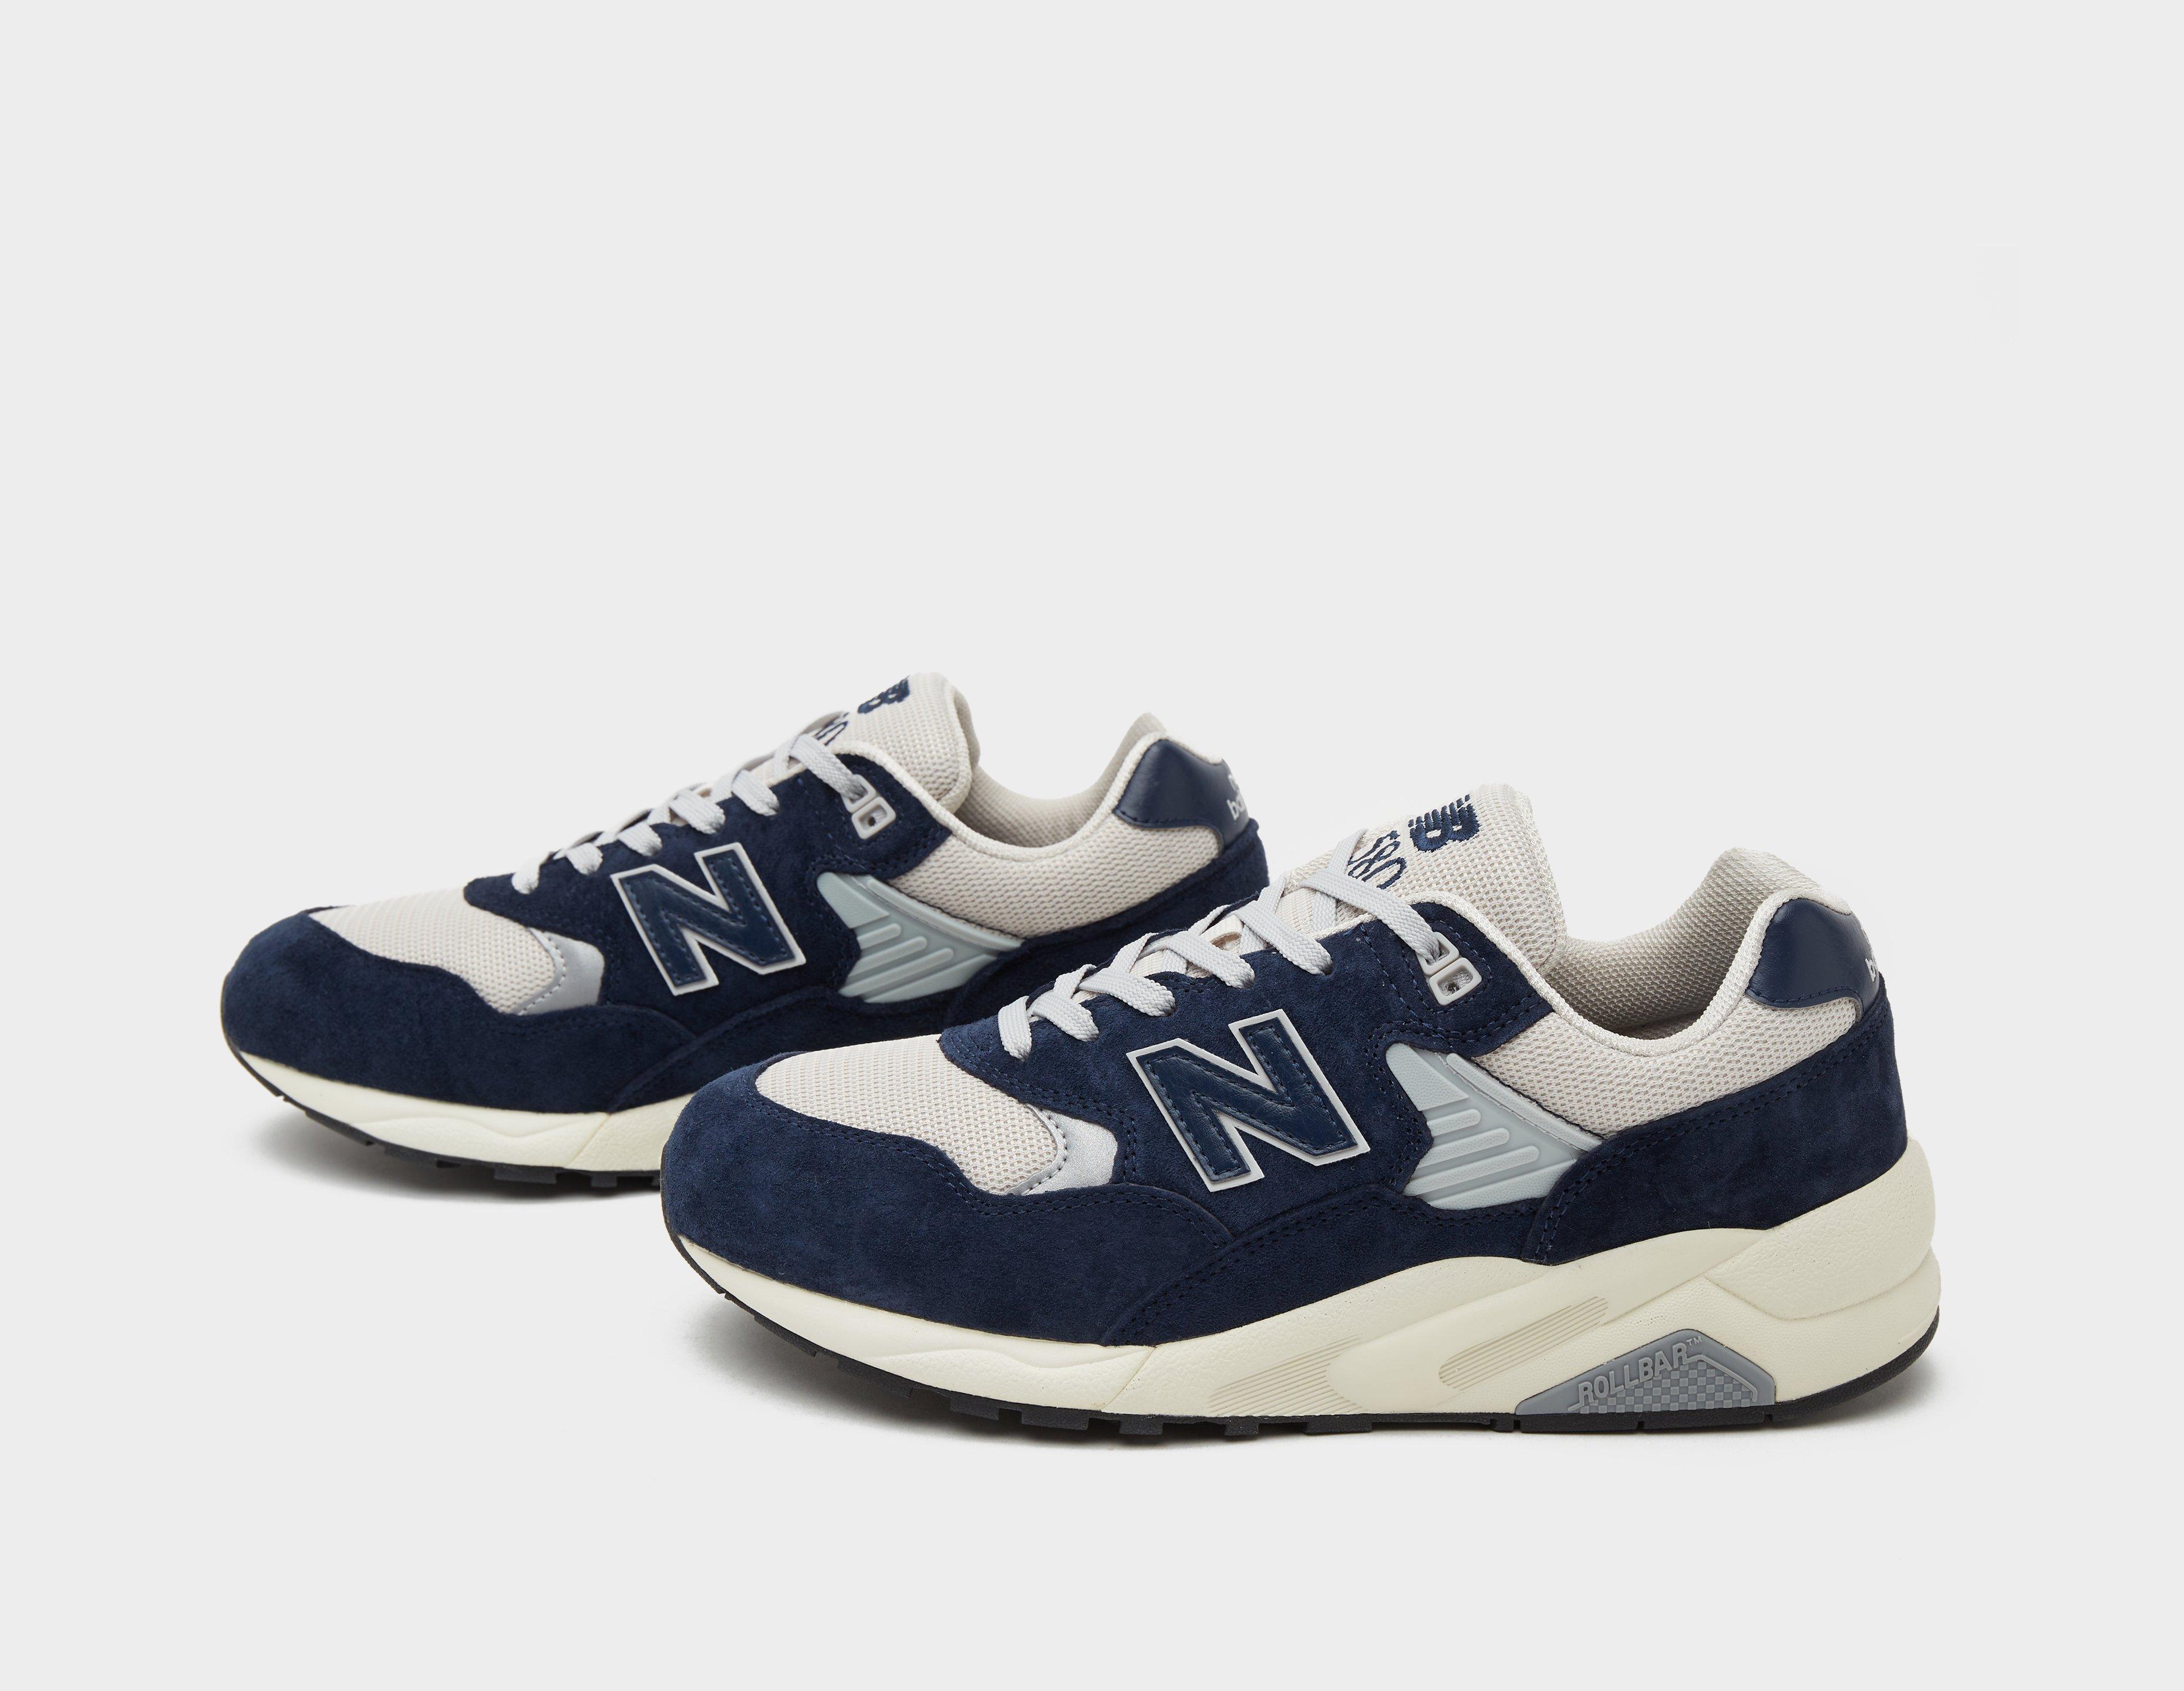 New Balance FuelCell Rebel v2 LIGHT BLUE WHITE Marathon Running Shoes Sneakers WFCXCP2 | New Balance 580 |